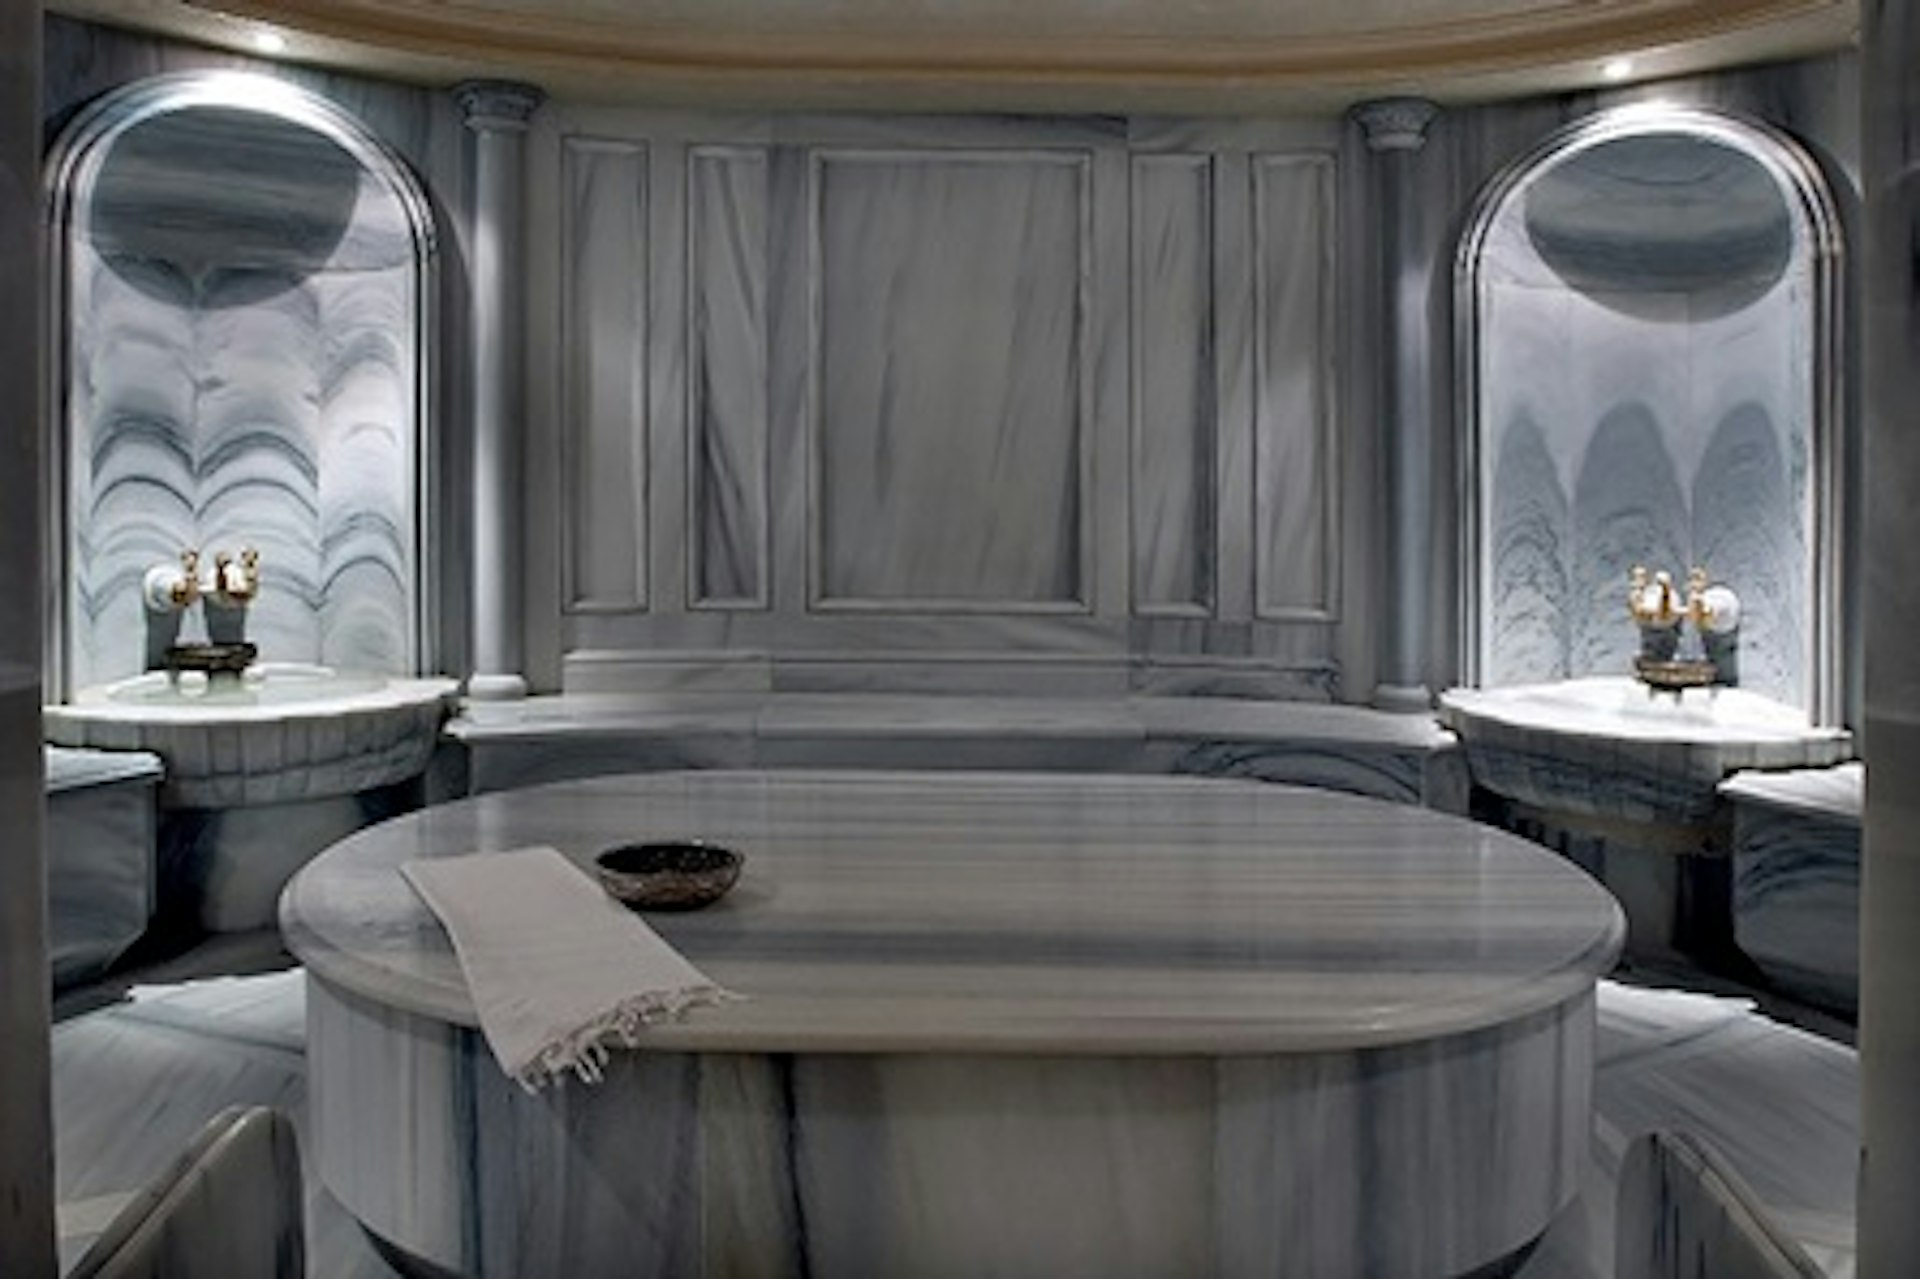 Turkish Delight Spa Experience at the 5* Bentley London 1